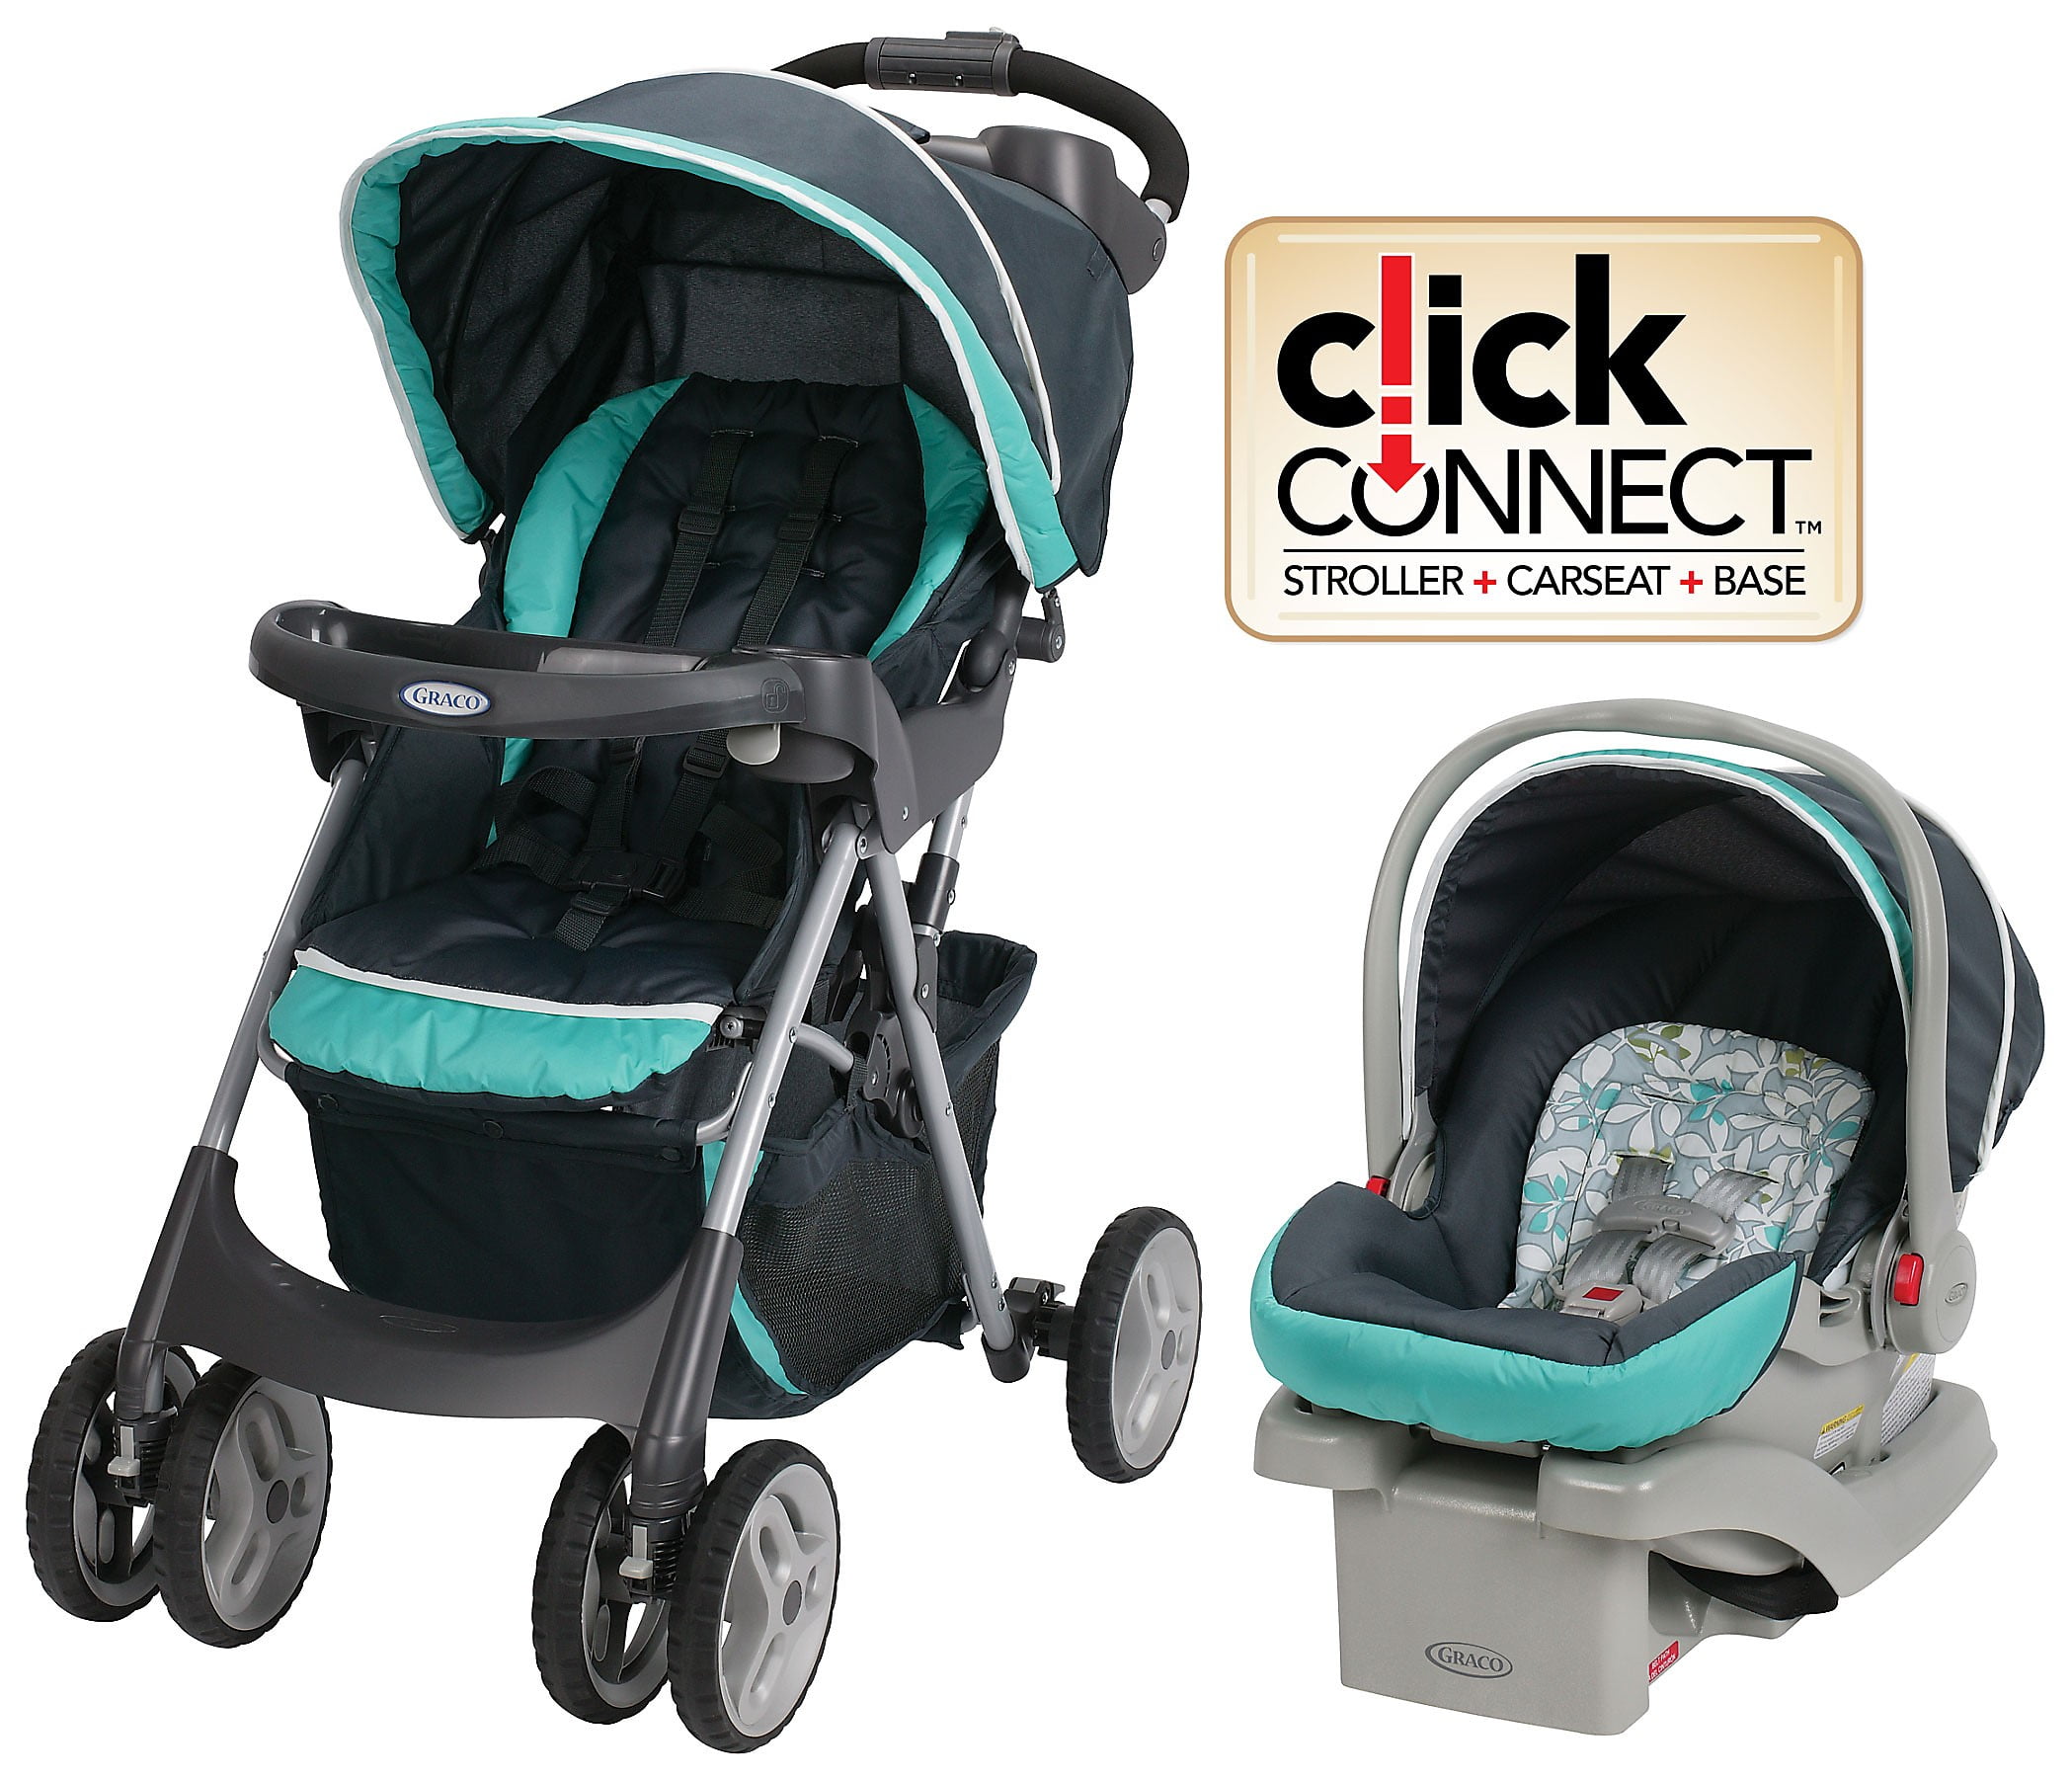 graco click connect stroller car seat